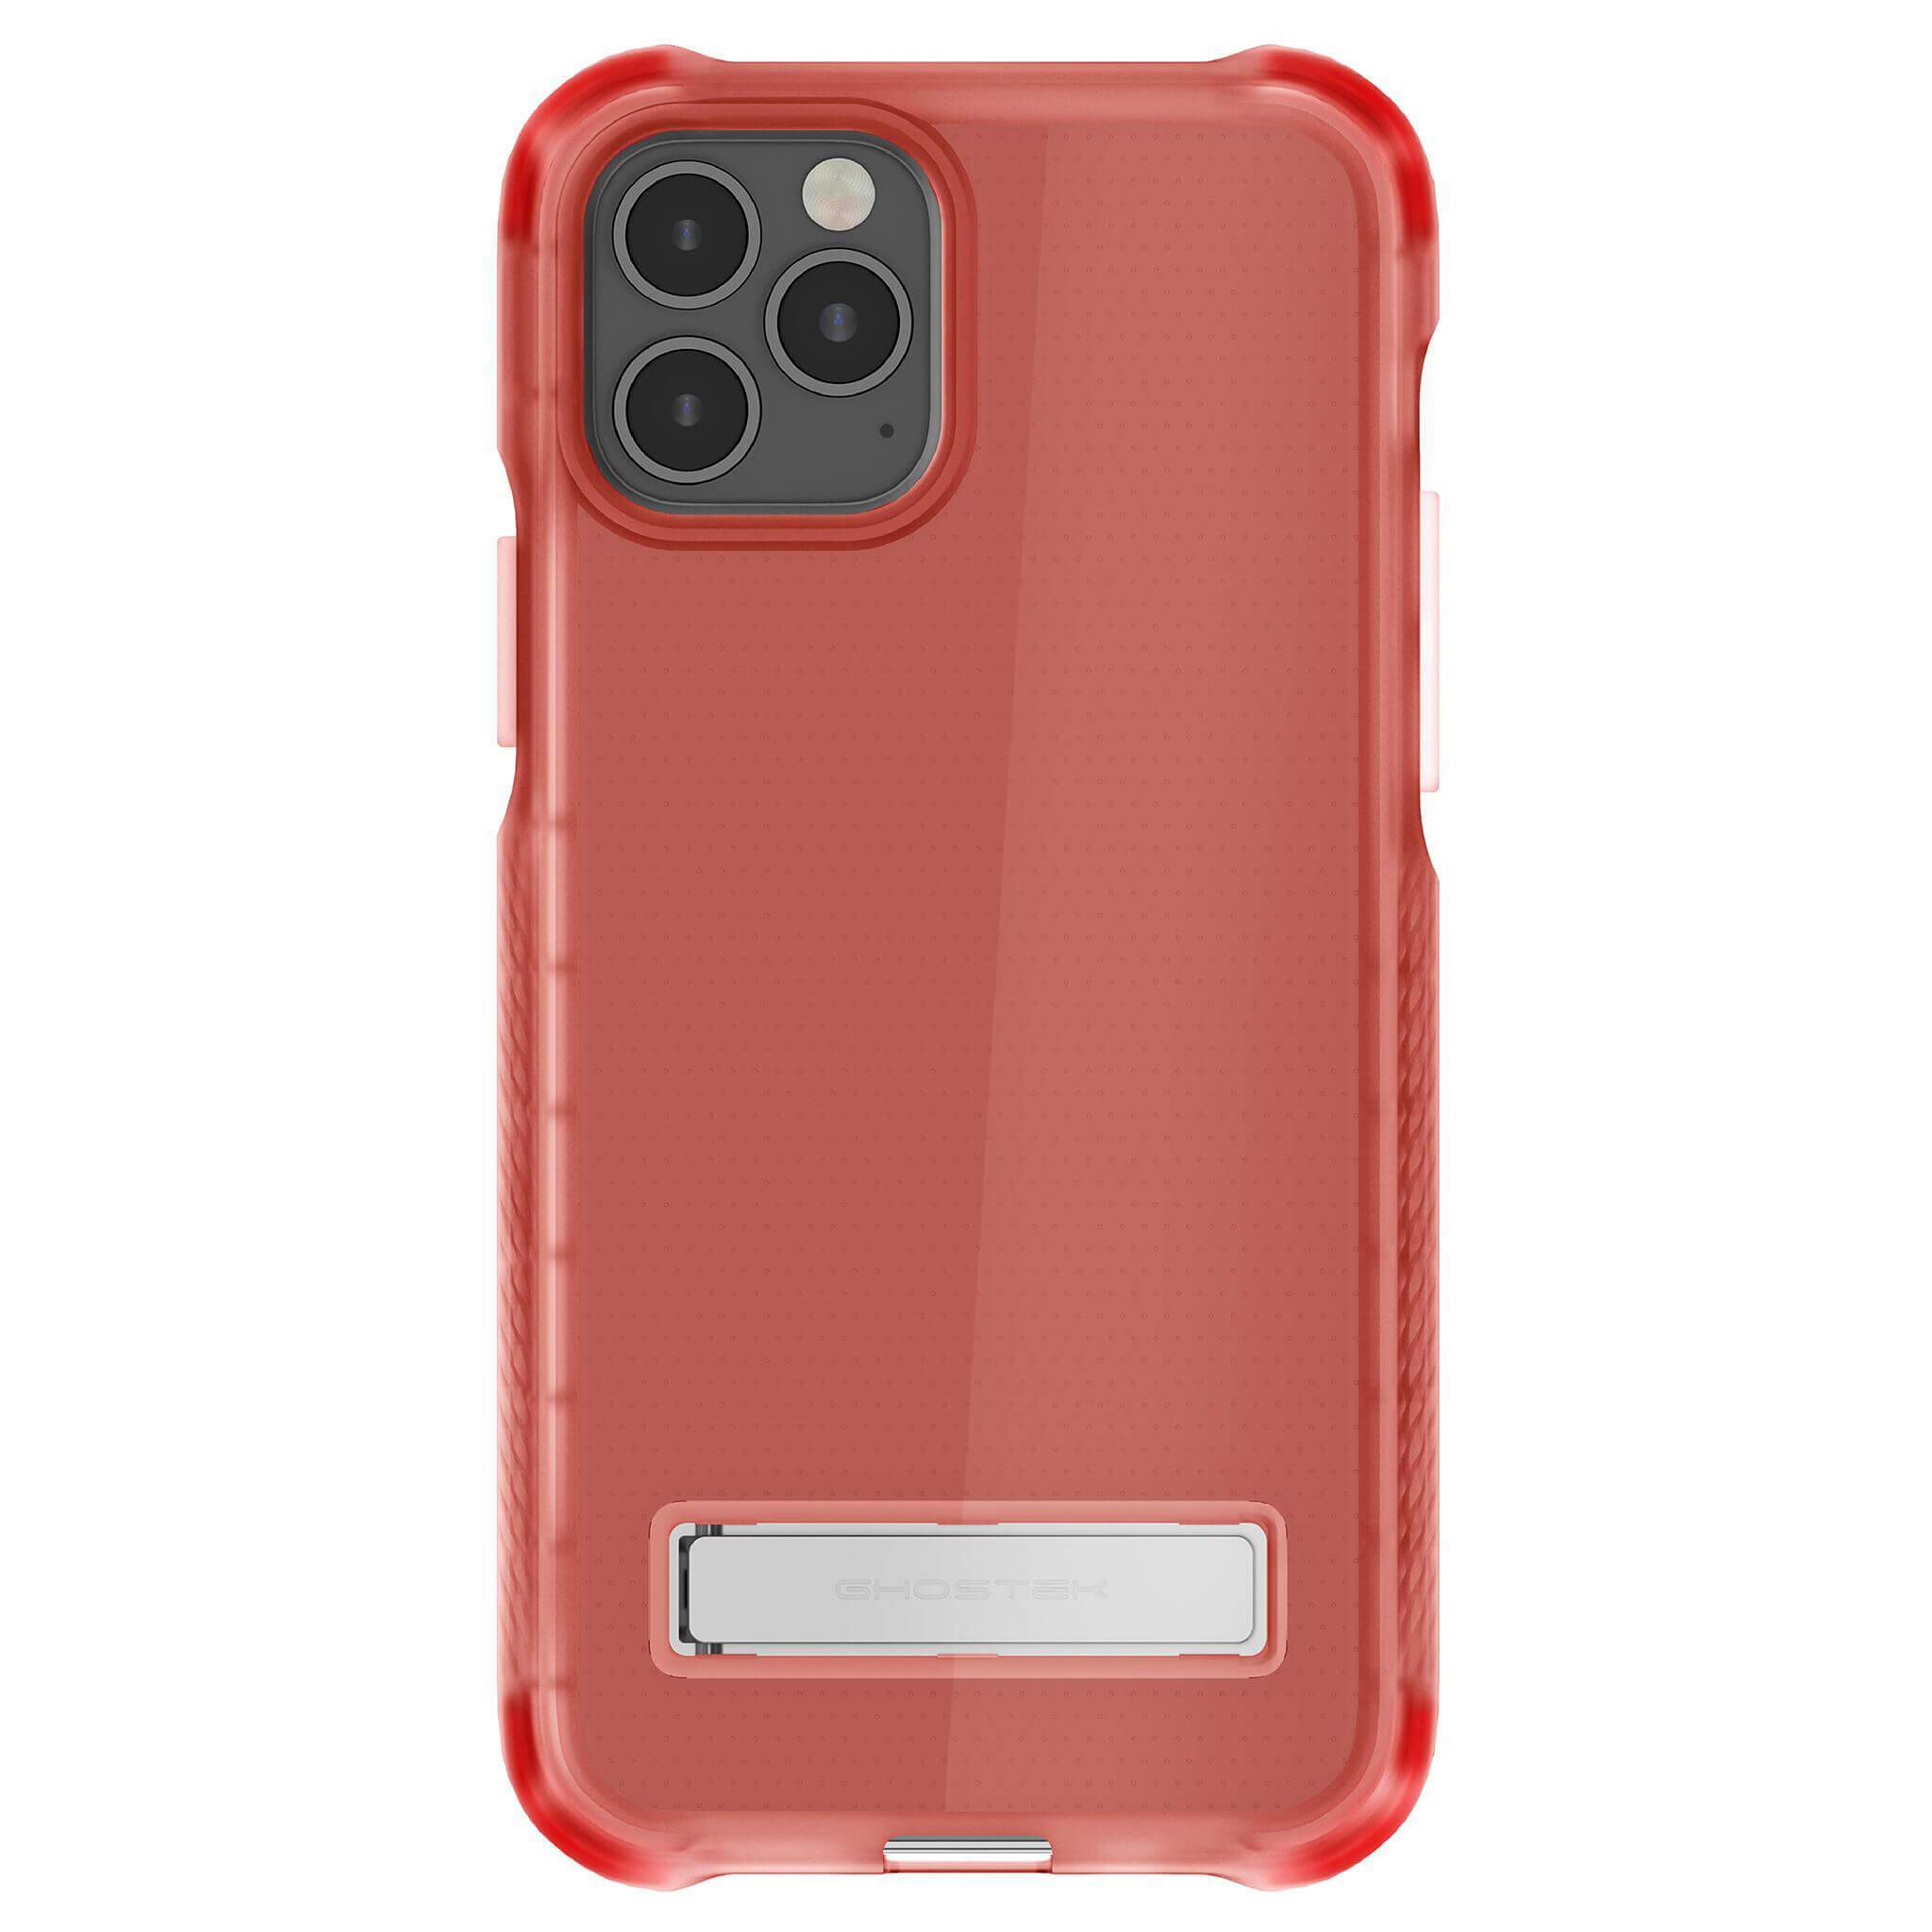  Clear iPhone 12 Case/iPhone 12 Pro Case with Built-in